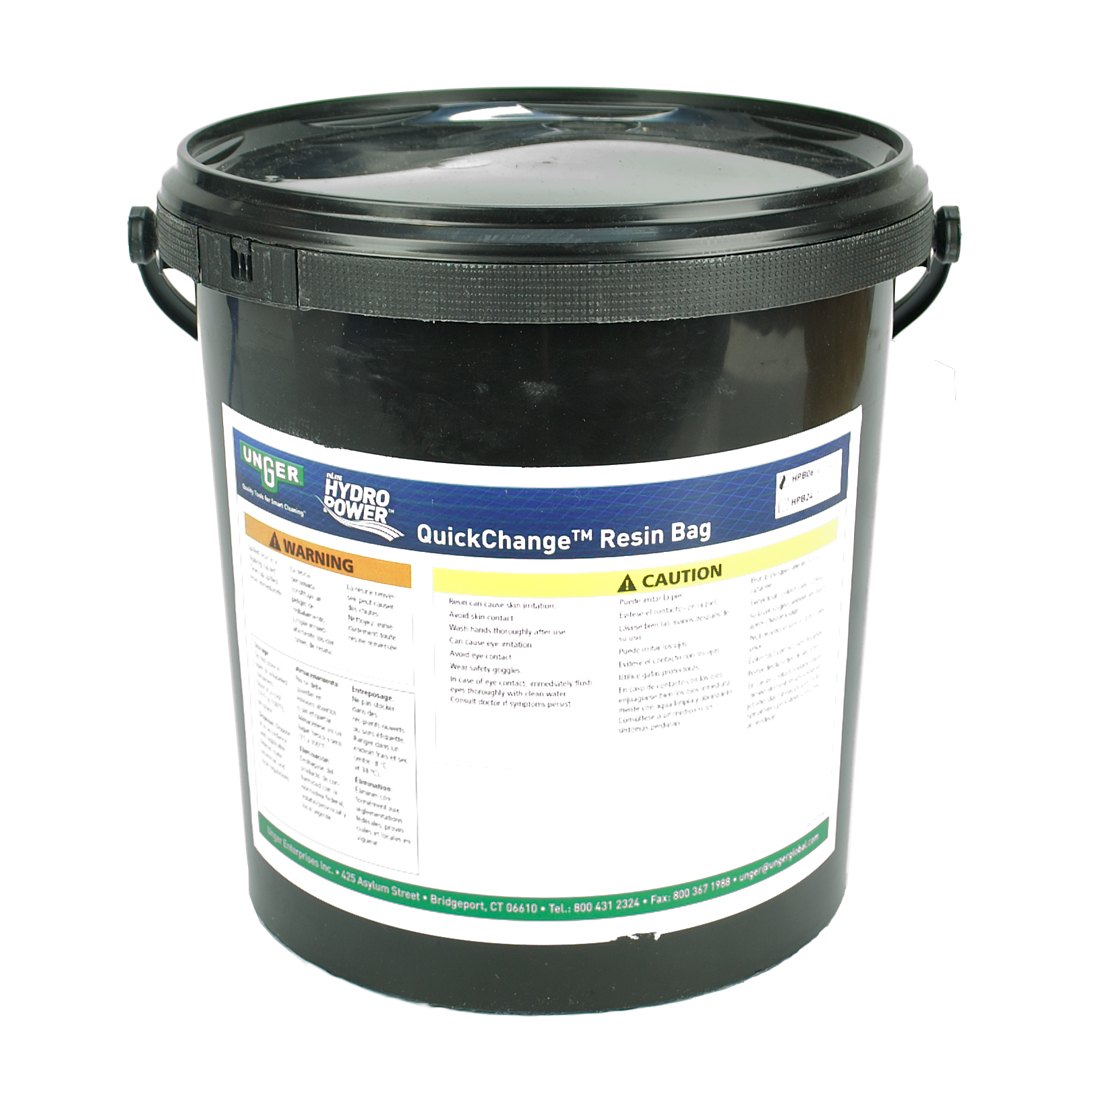 Unger HydroPower Resin Bag Pail Front View